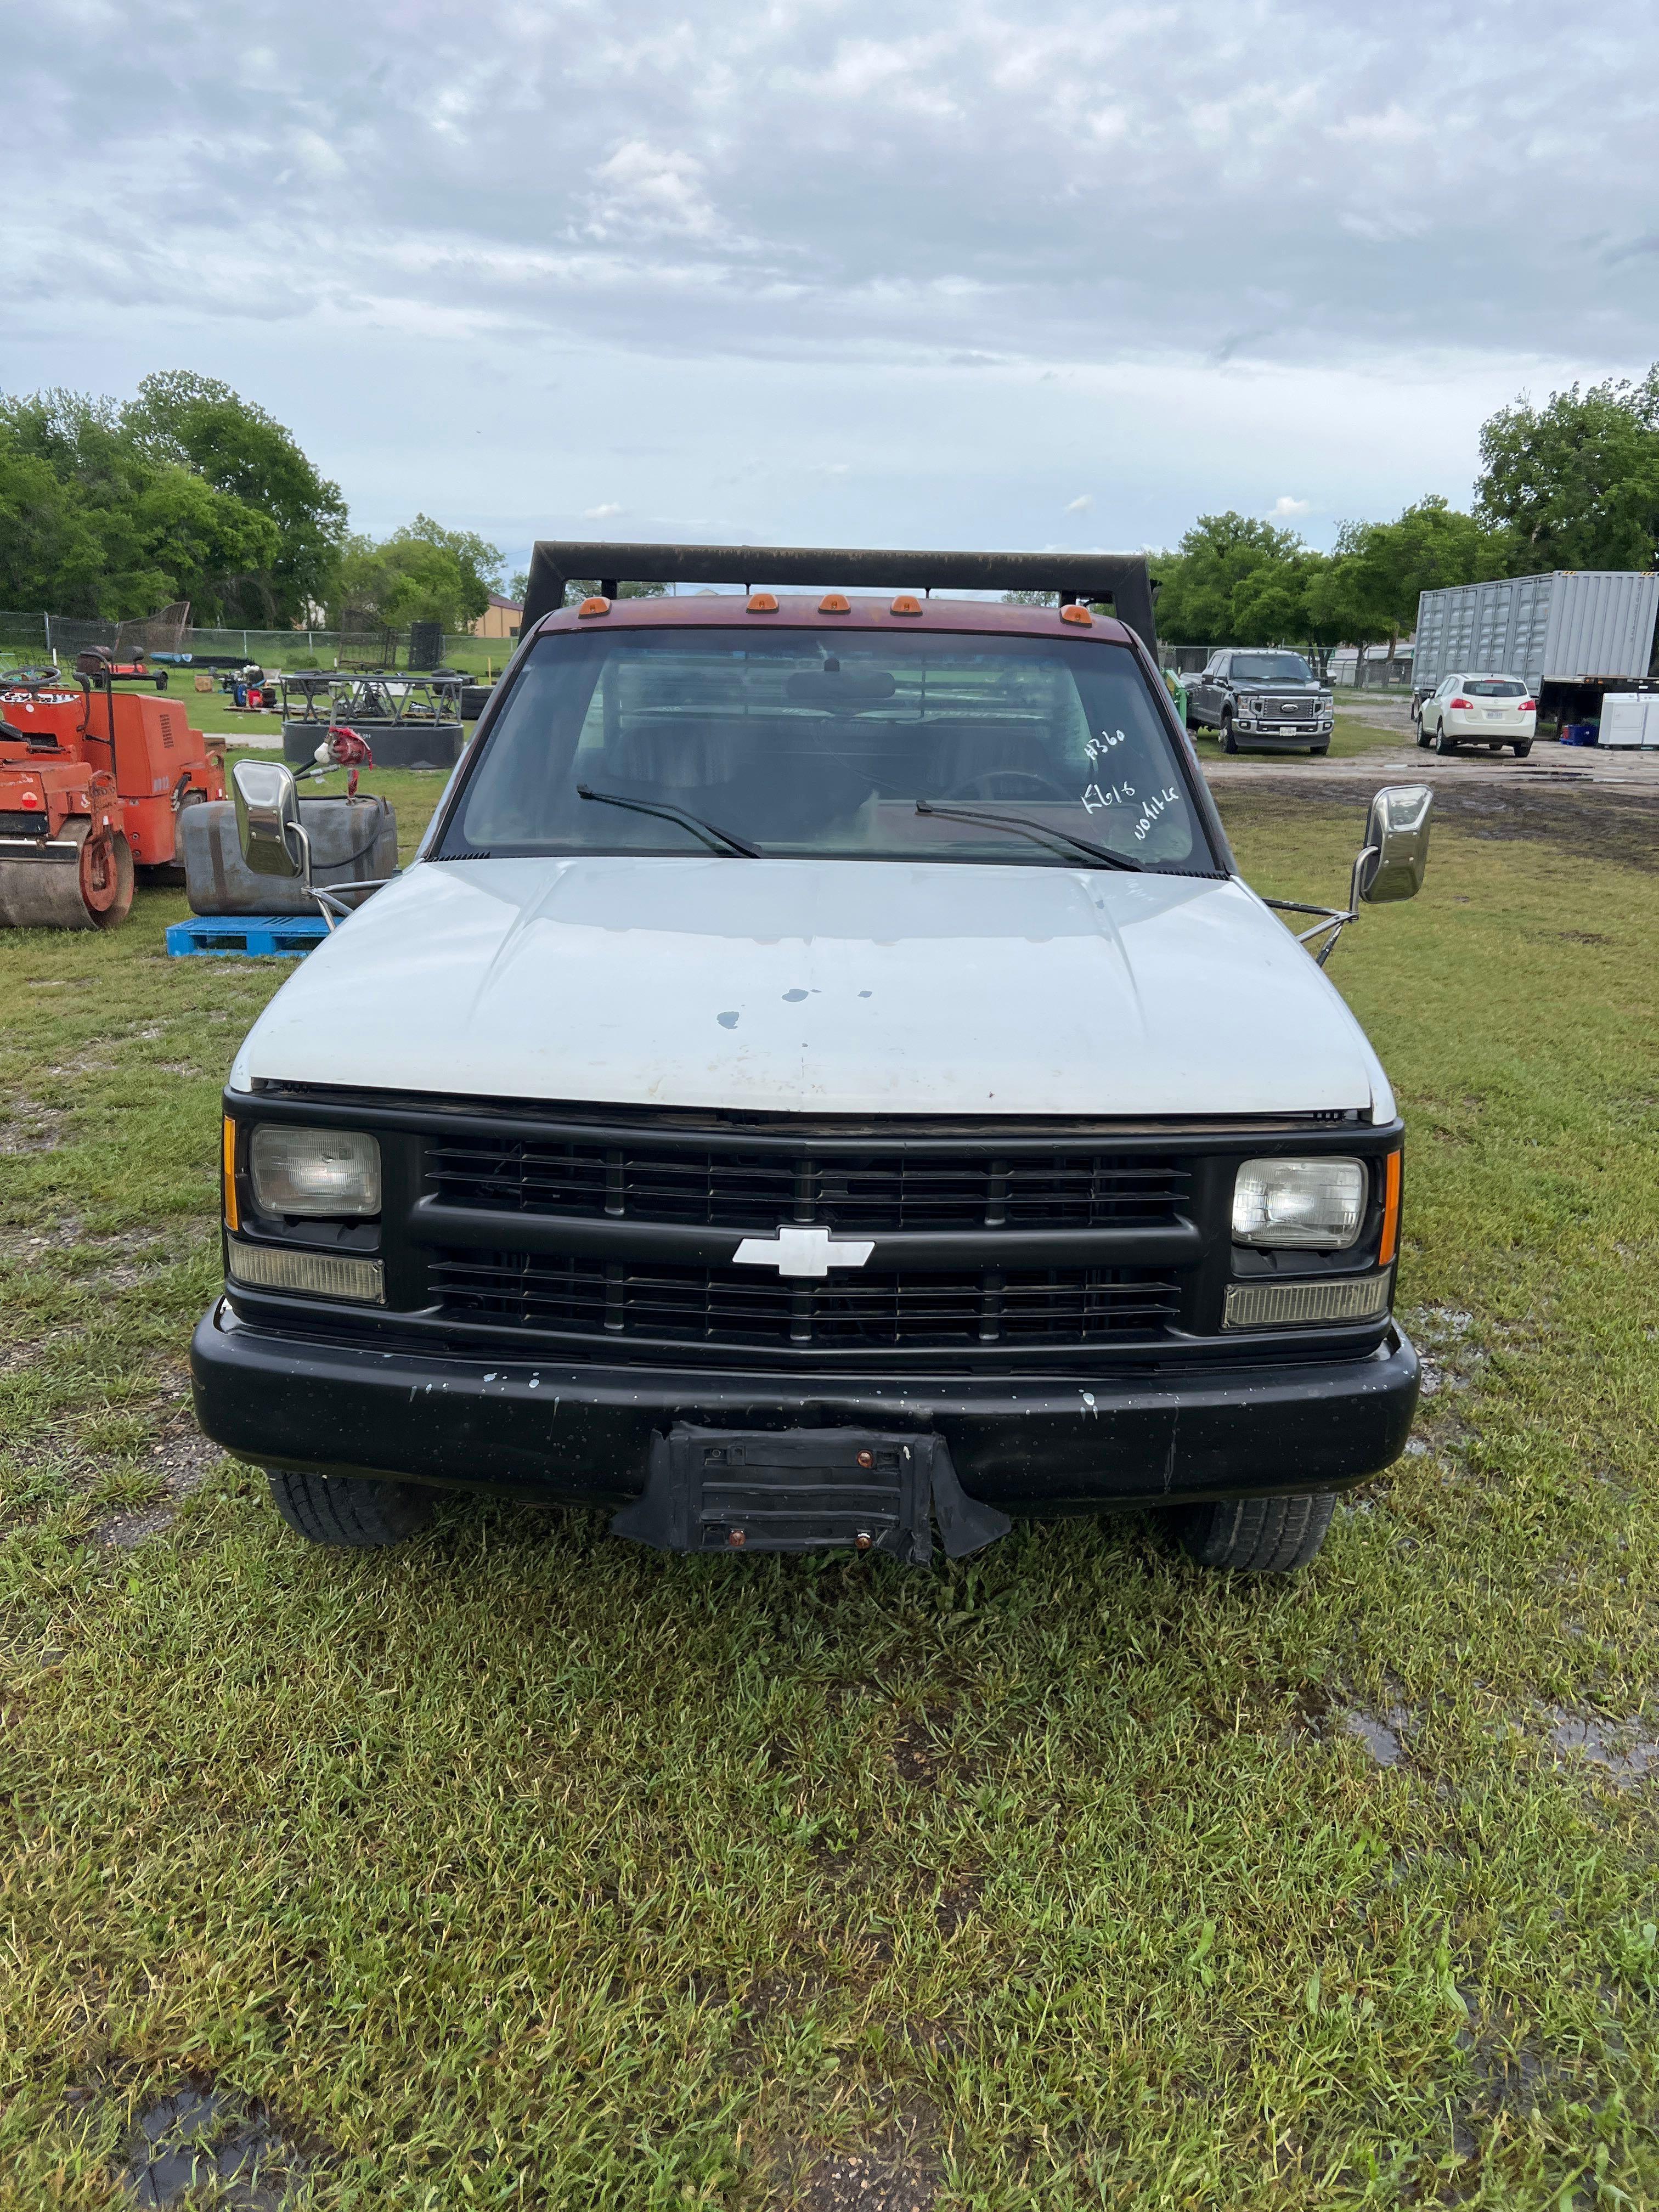 1994 Chevrolet 3500 Flatbed - Standard Transmission - 2 wd - 181,597 miles - Starts and Runs